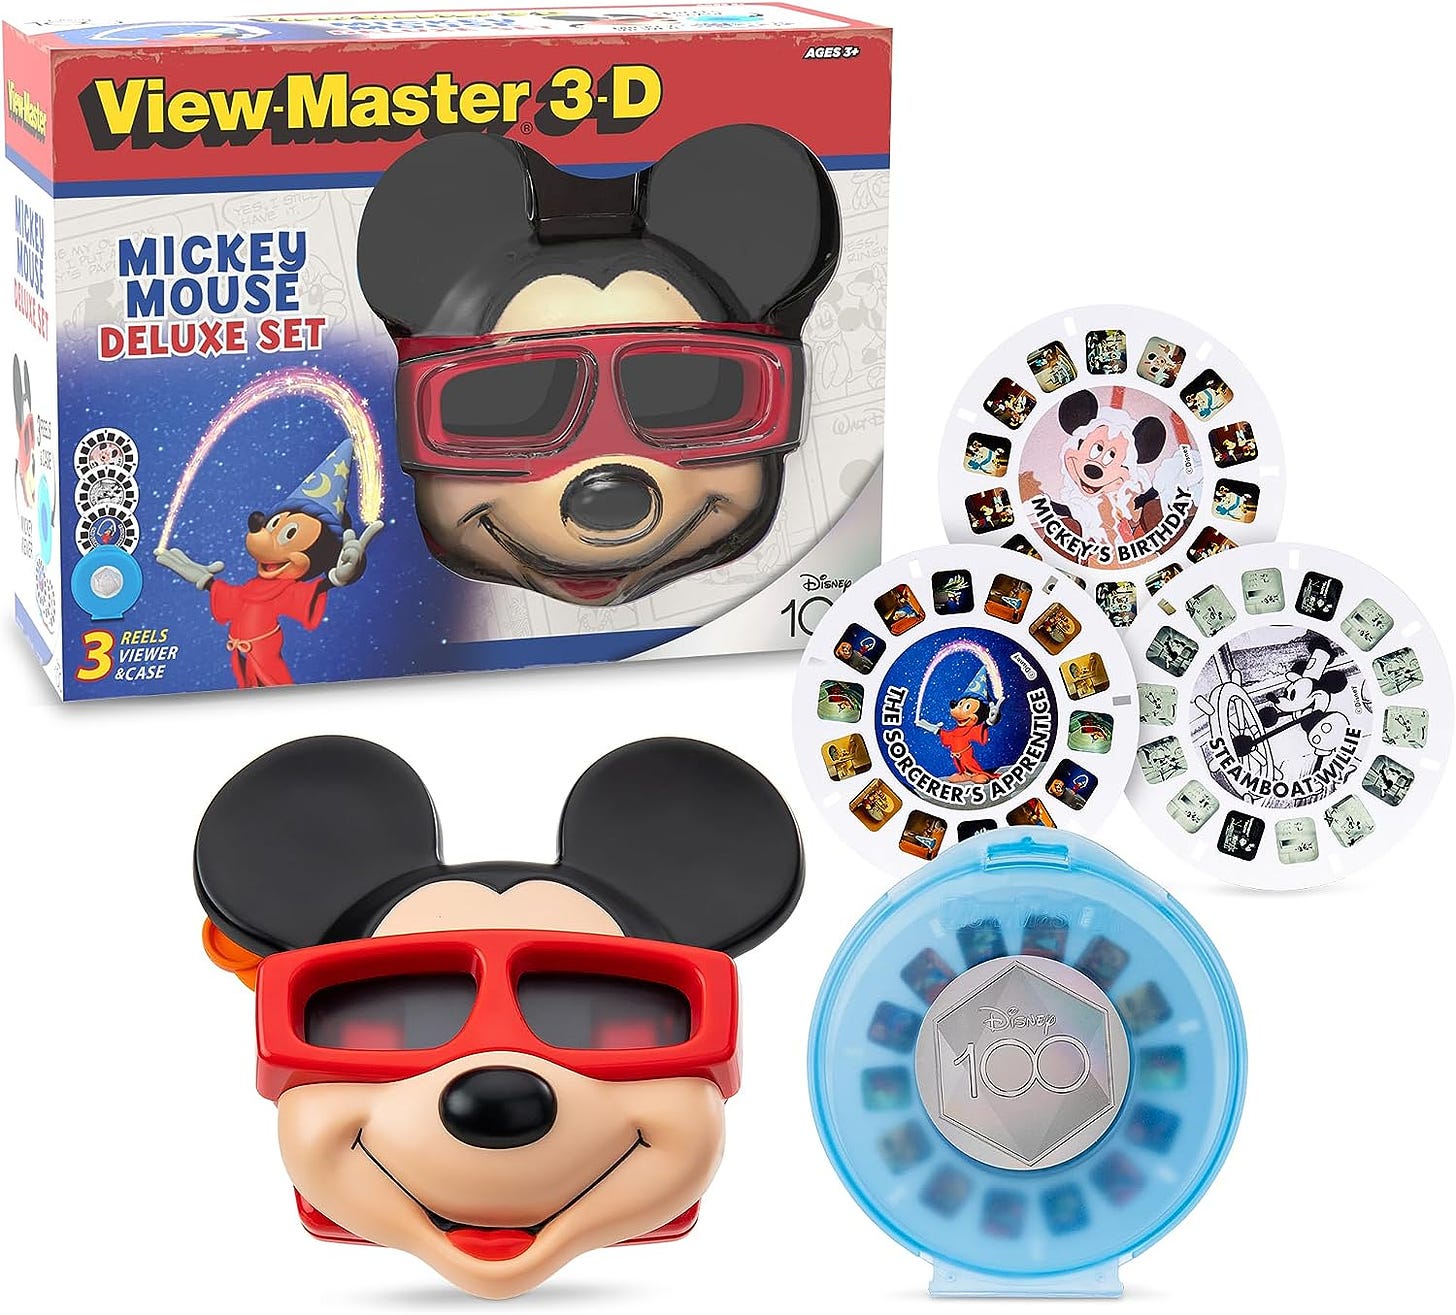 New View-Master Product Alert! - by Rebecca Kilbreath